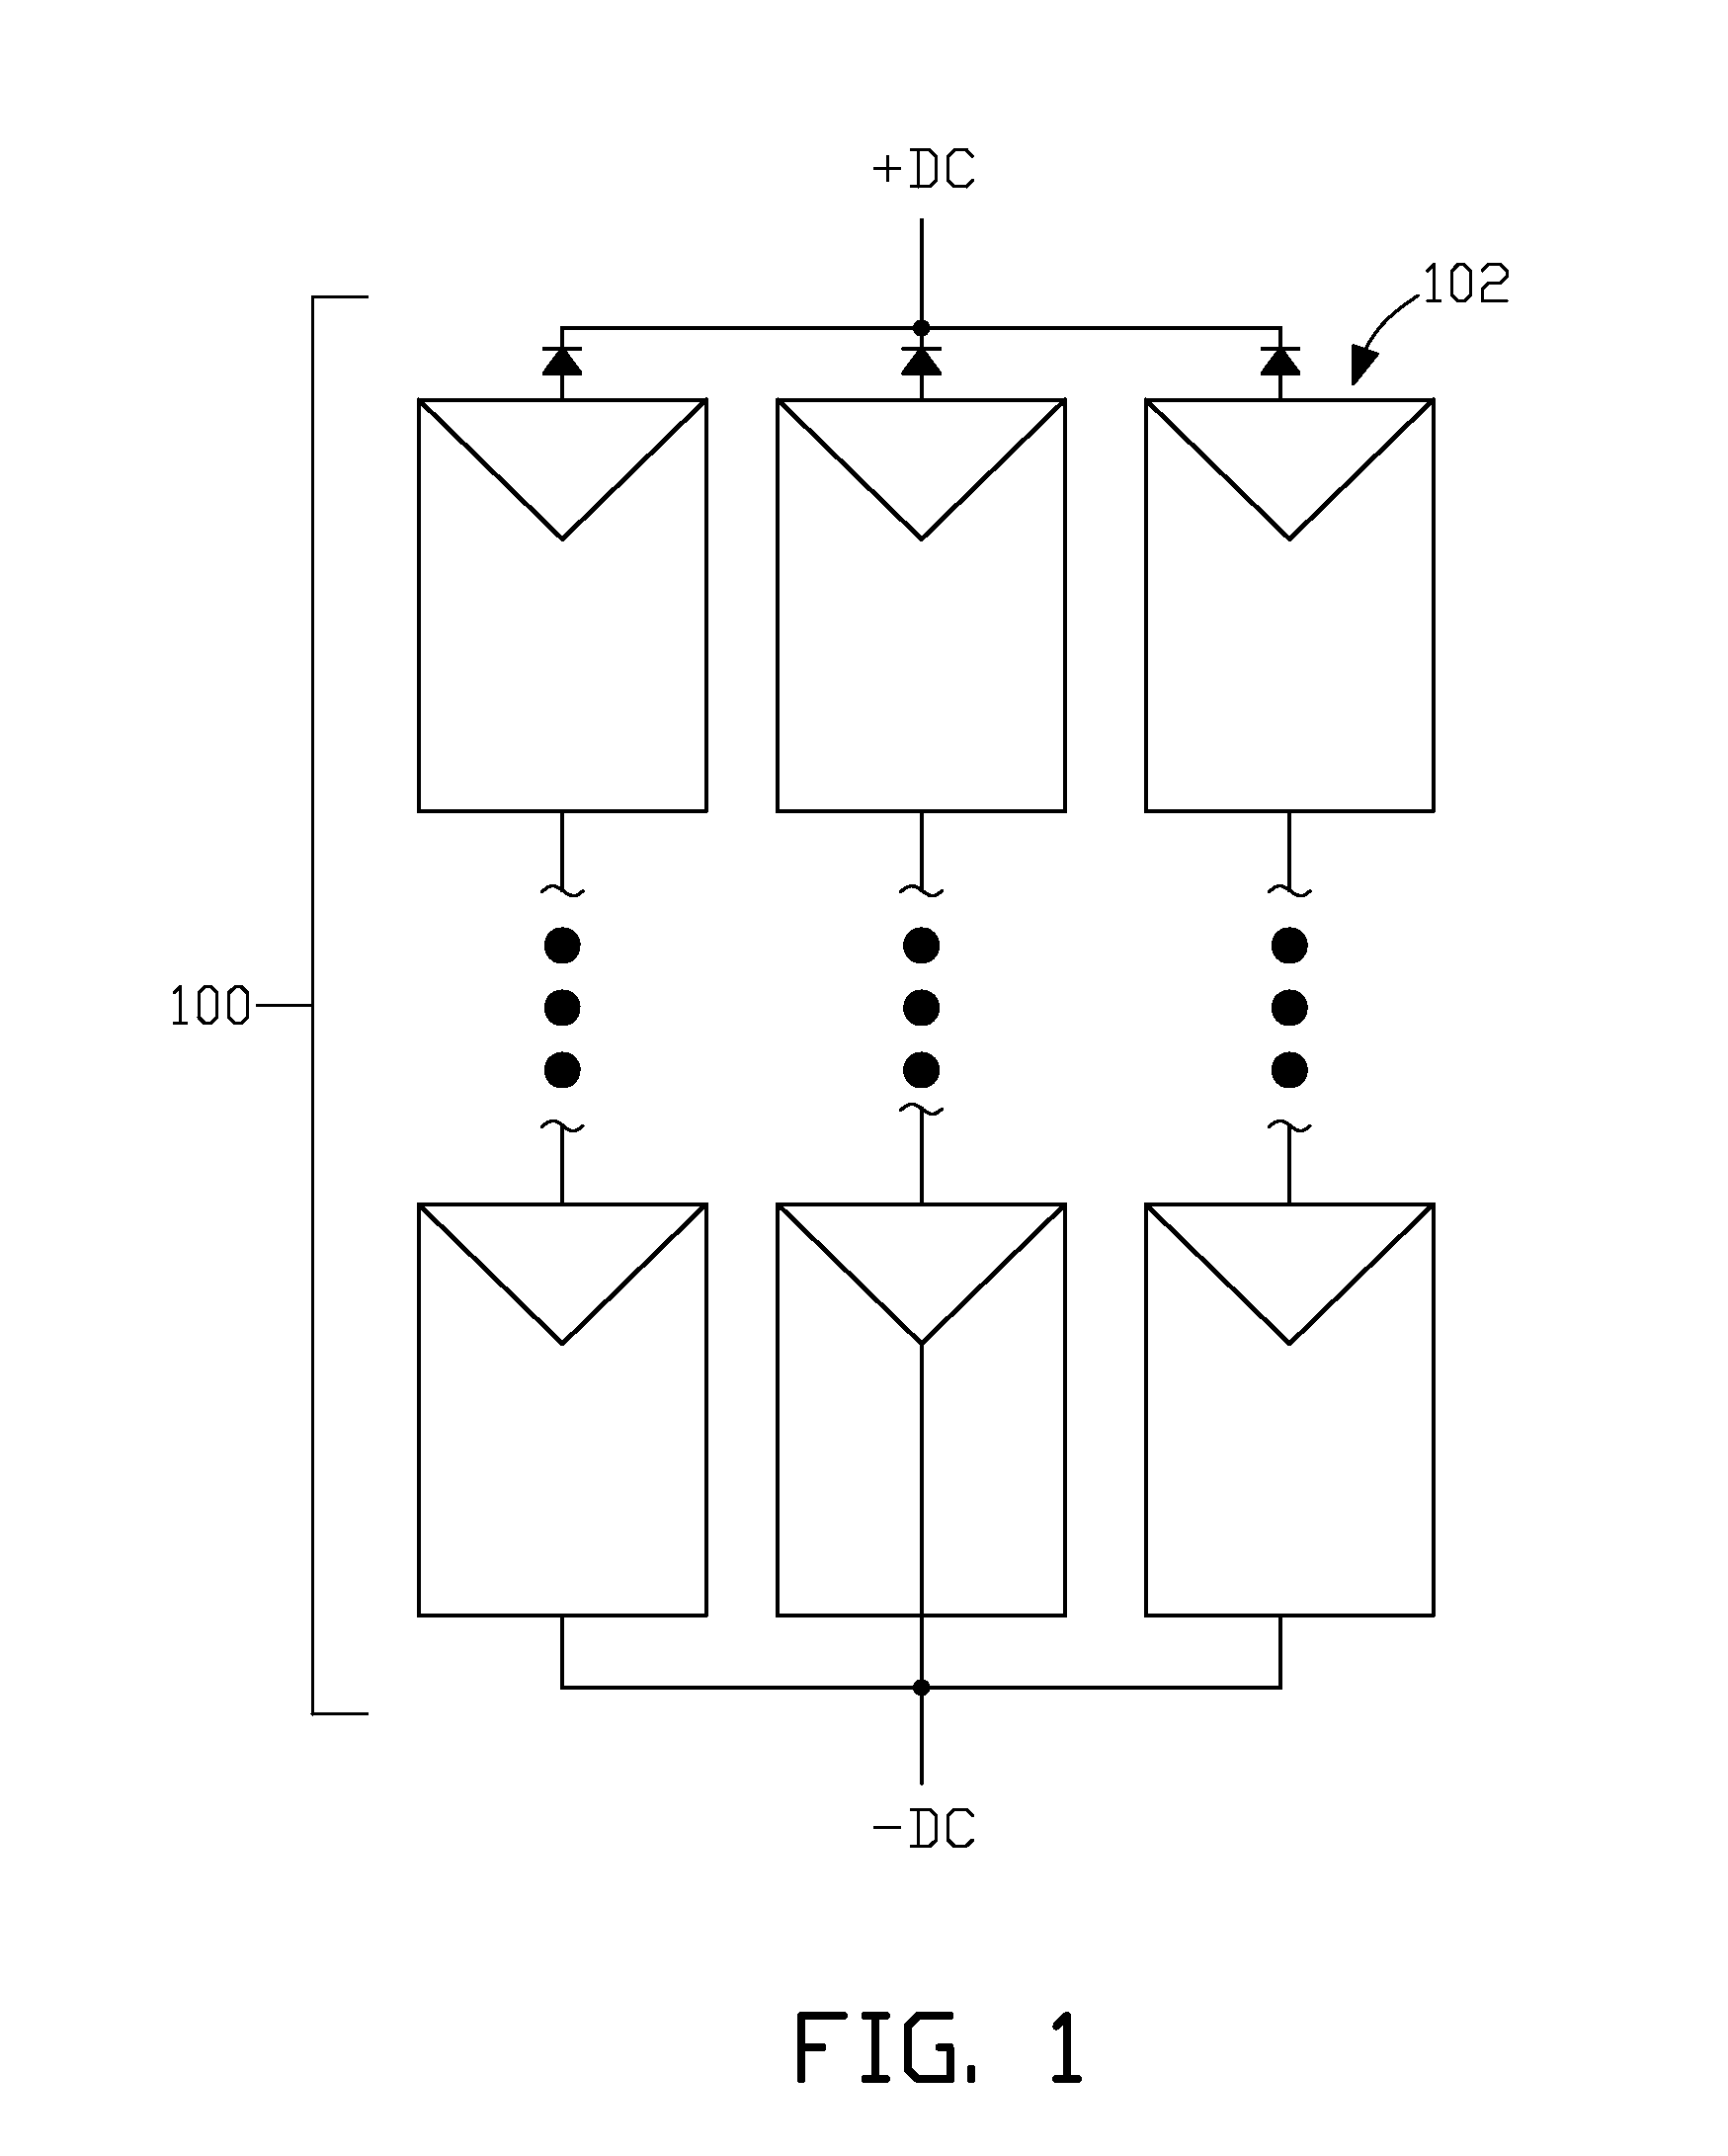 Multiphase grid synchronized regulated current source inverter systems